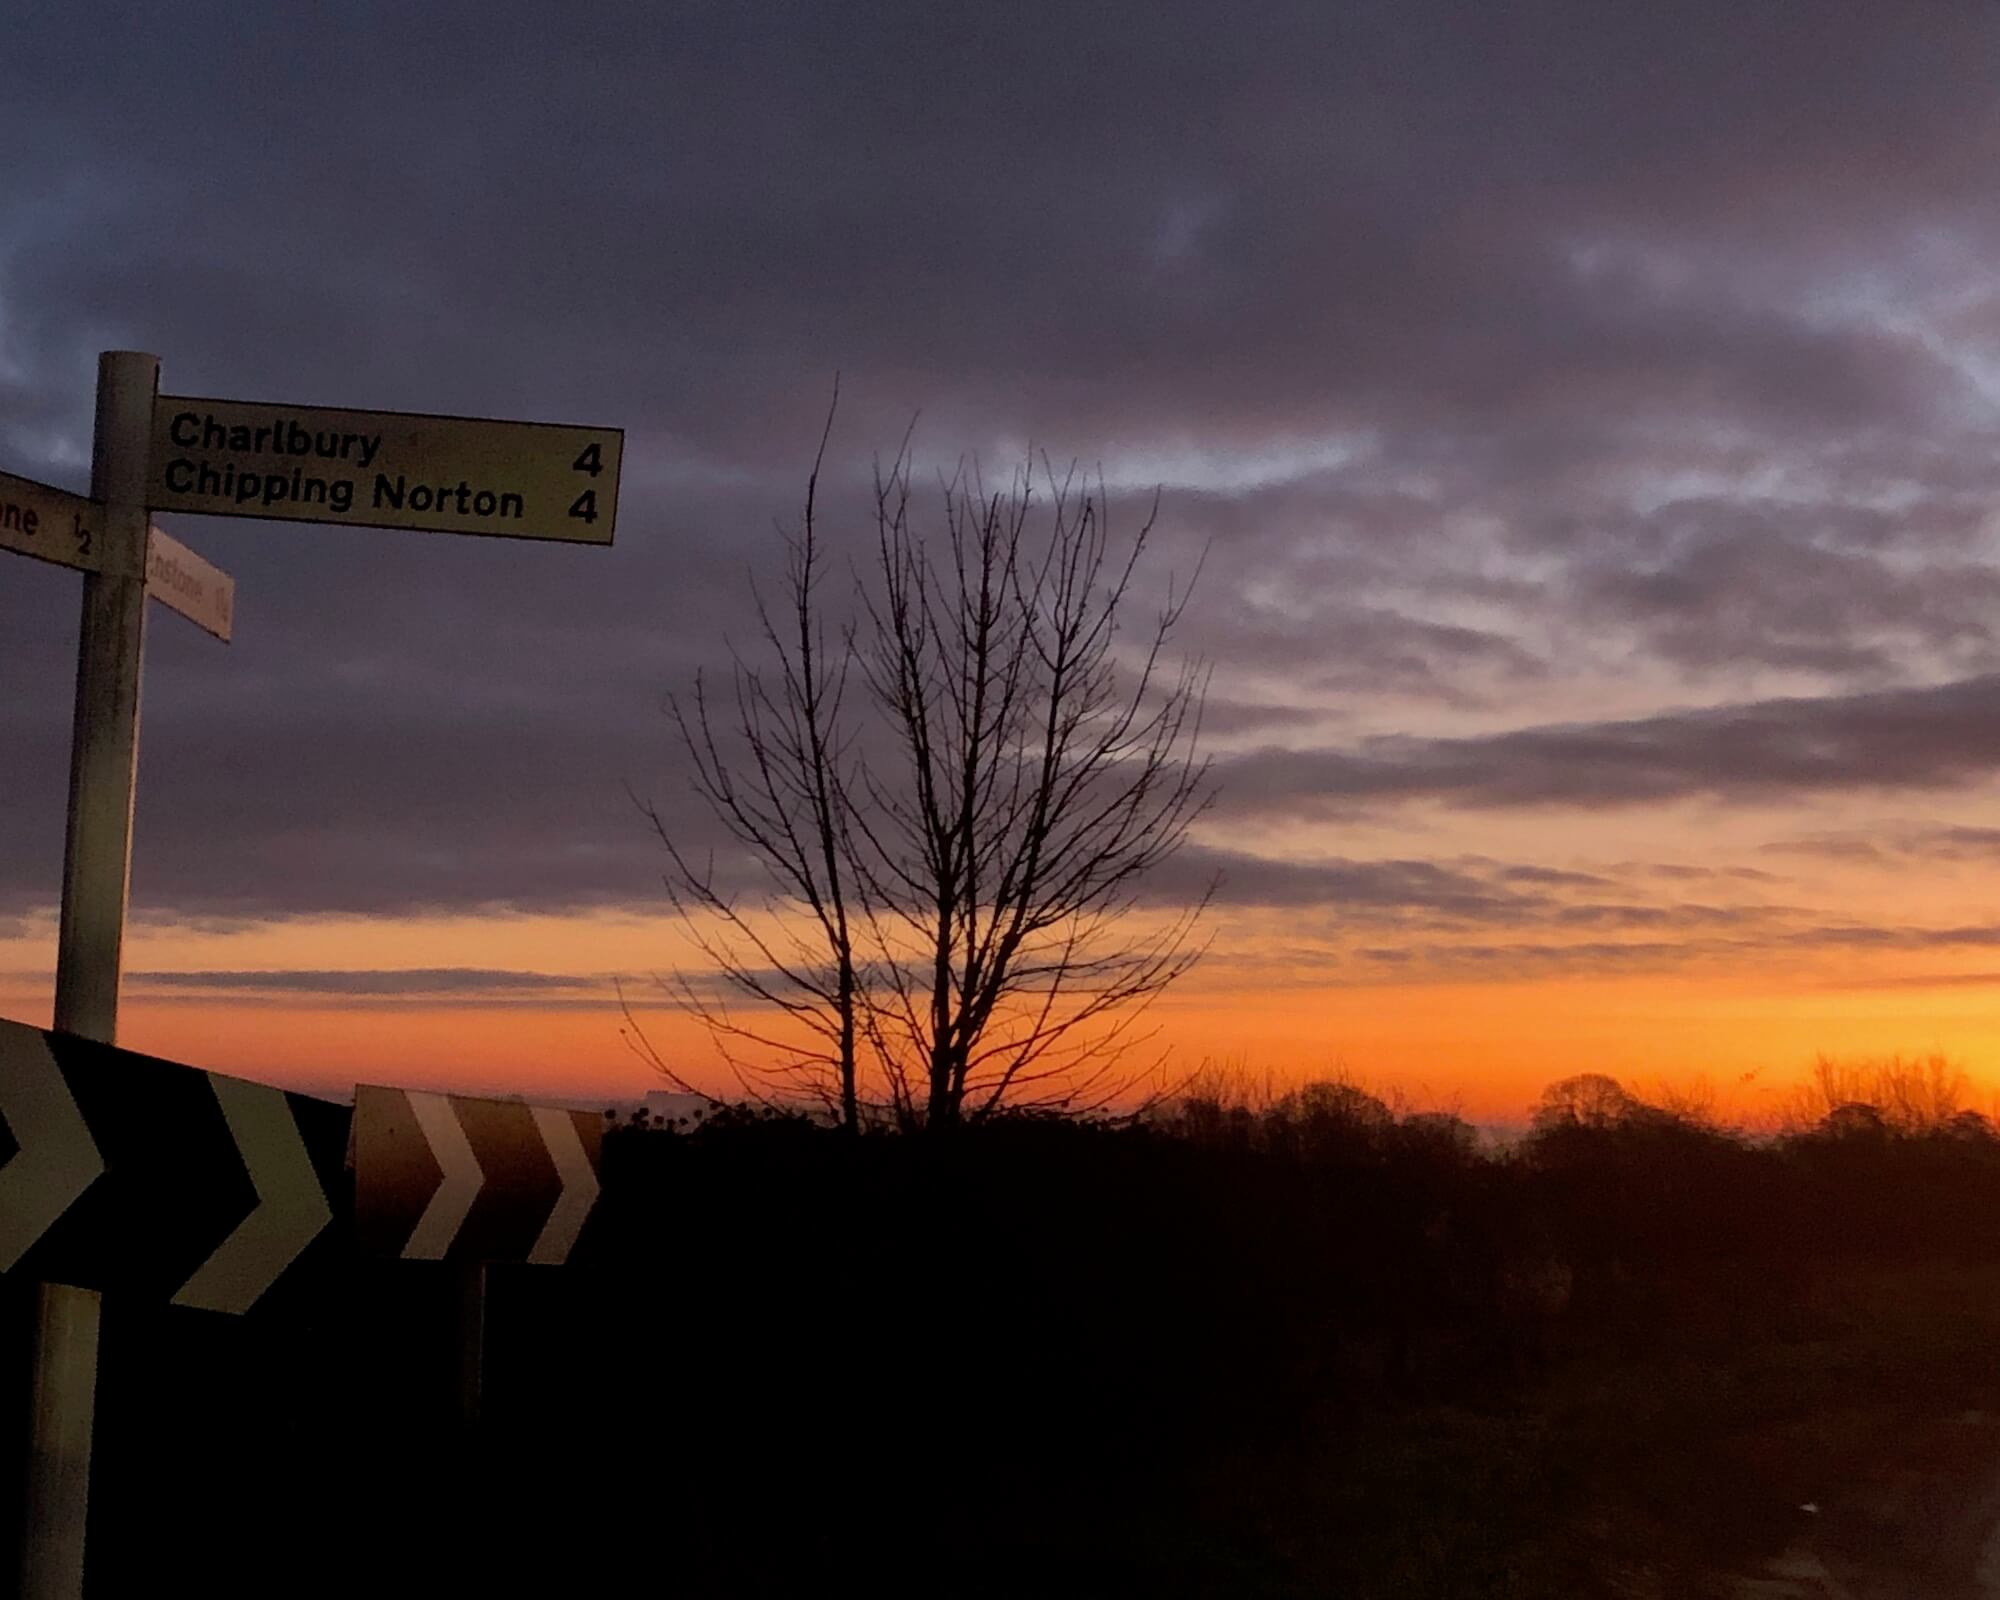 crossroads signs on a red dawn morning directing Charlbury and Chipping Norton 4 miles each